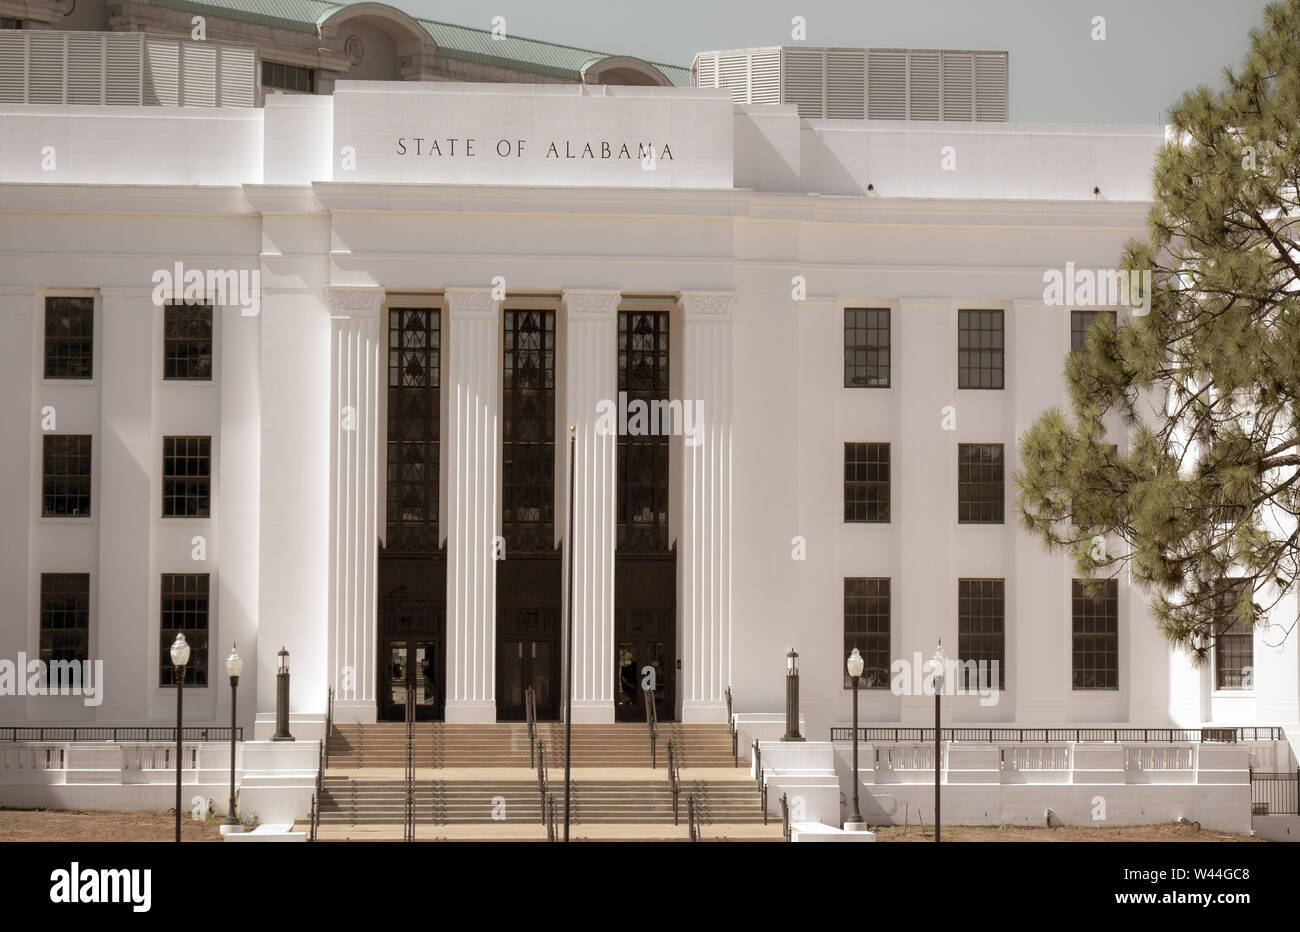 The Justice Department for the State of Alabama building, where the Attorney General has offices in the state capitol of Montgomery, AL, USA, in sepia Stock Photo